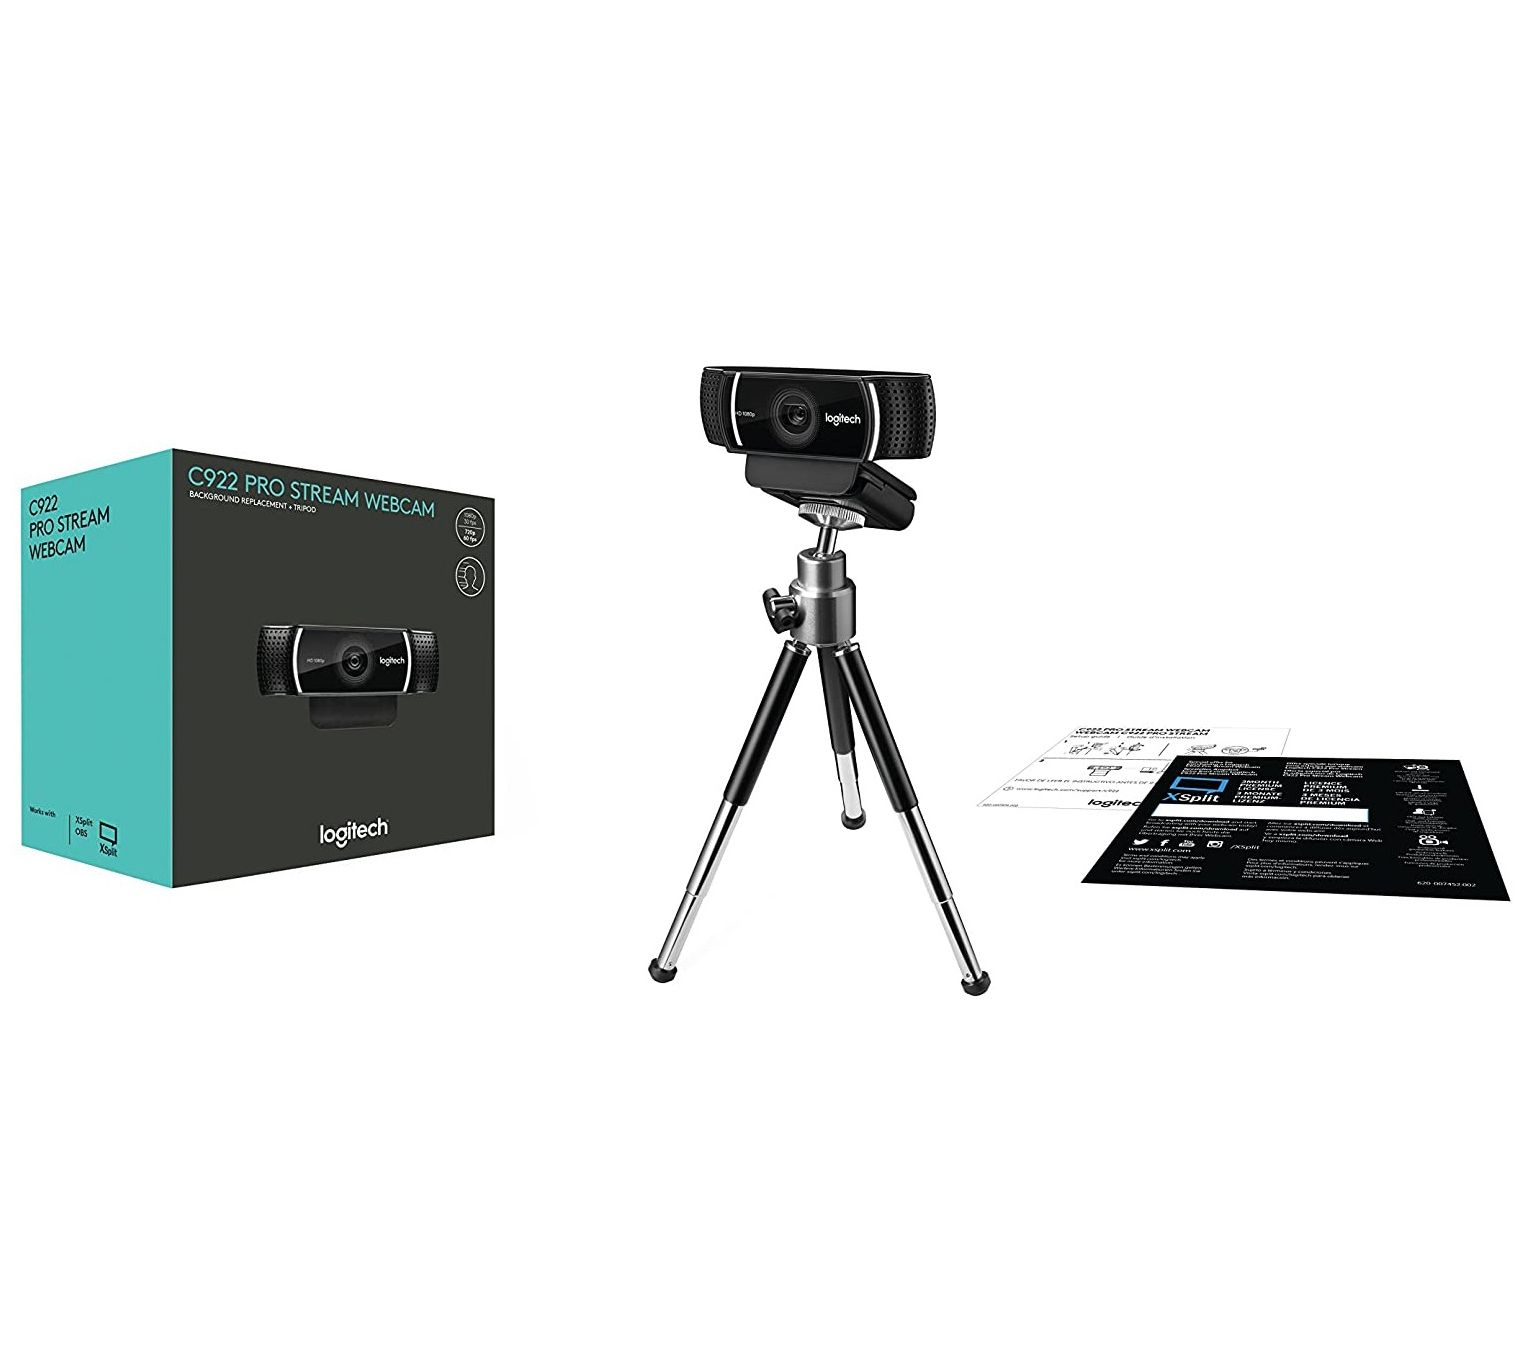 Nat sted rygrad Kong Lear Logitech C922 Pro Stream Webcam with Tripod and Mounting Clip - QVC.com